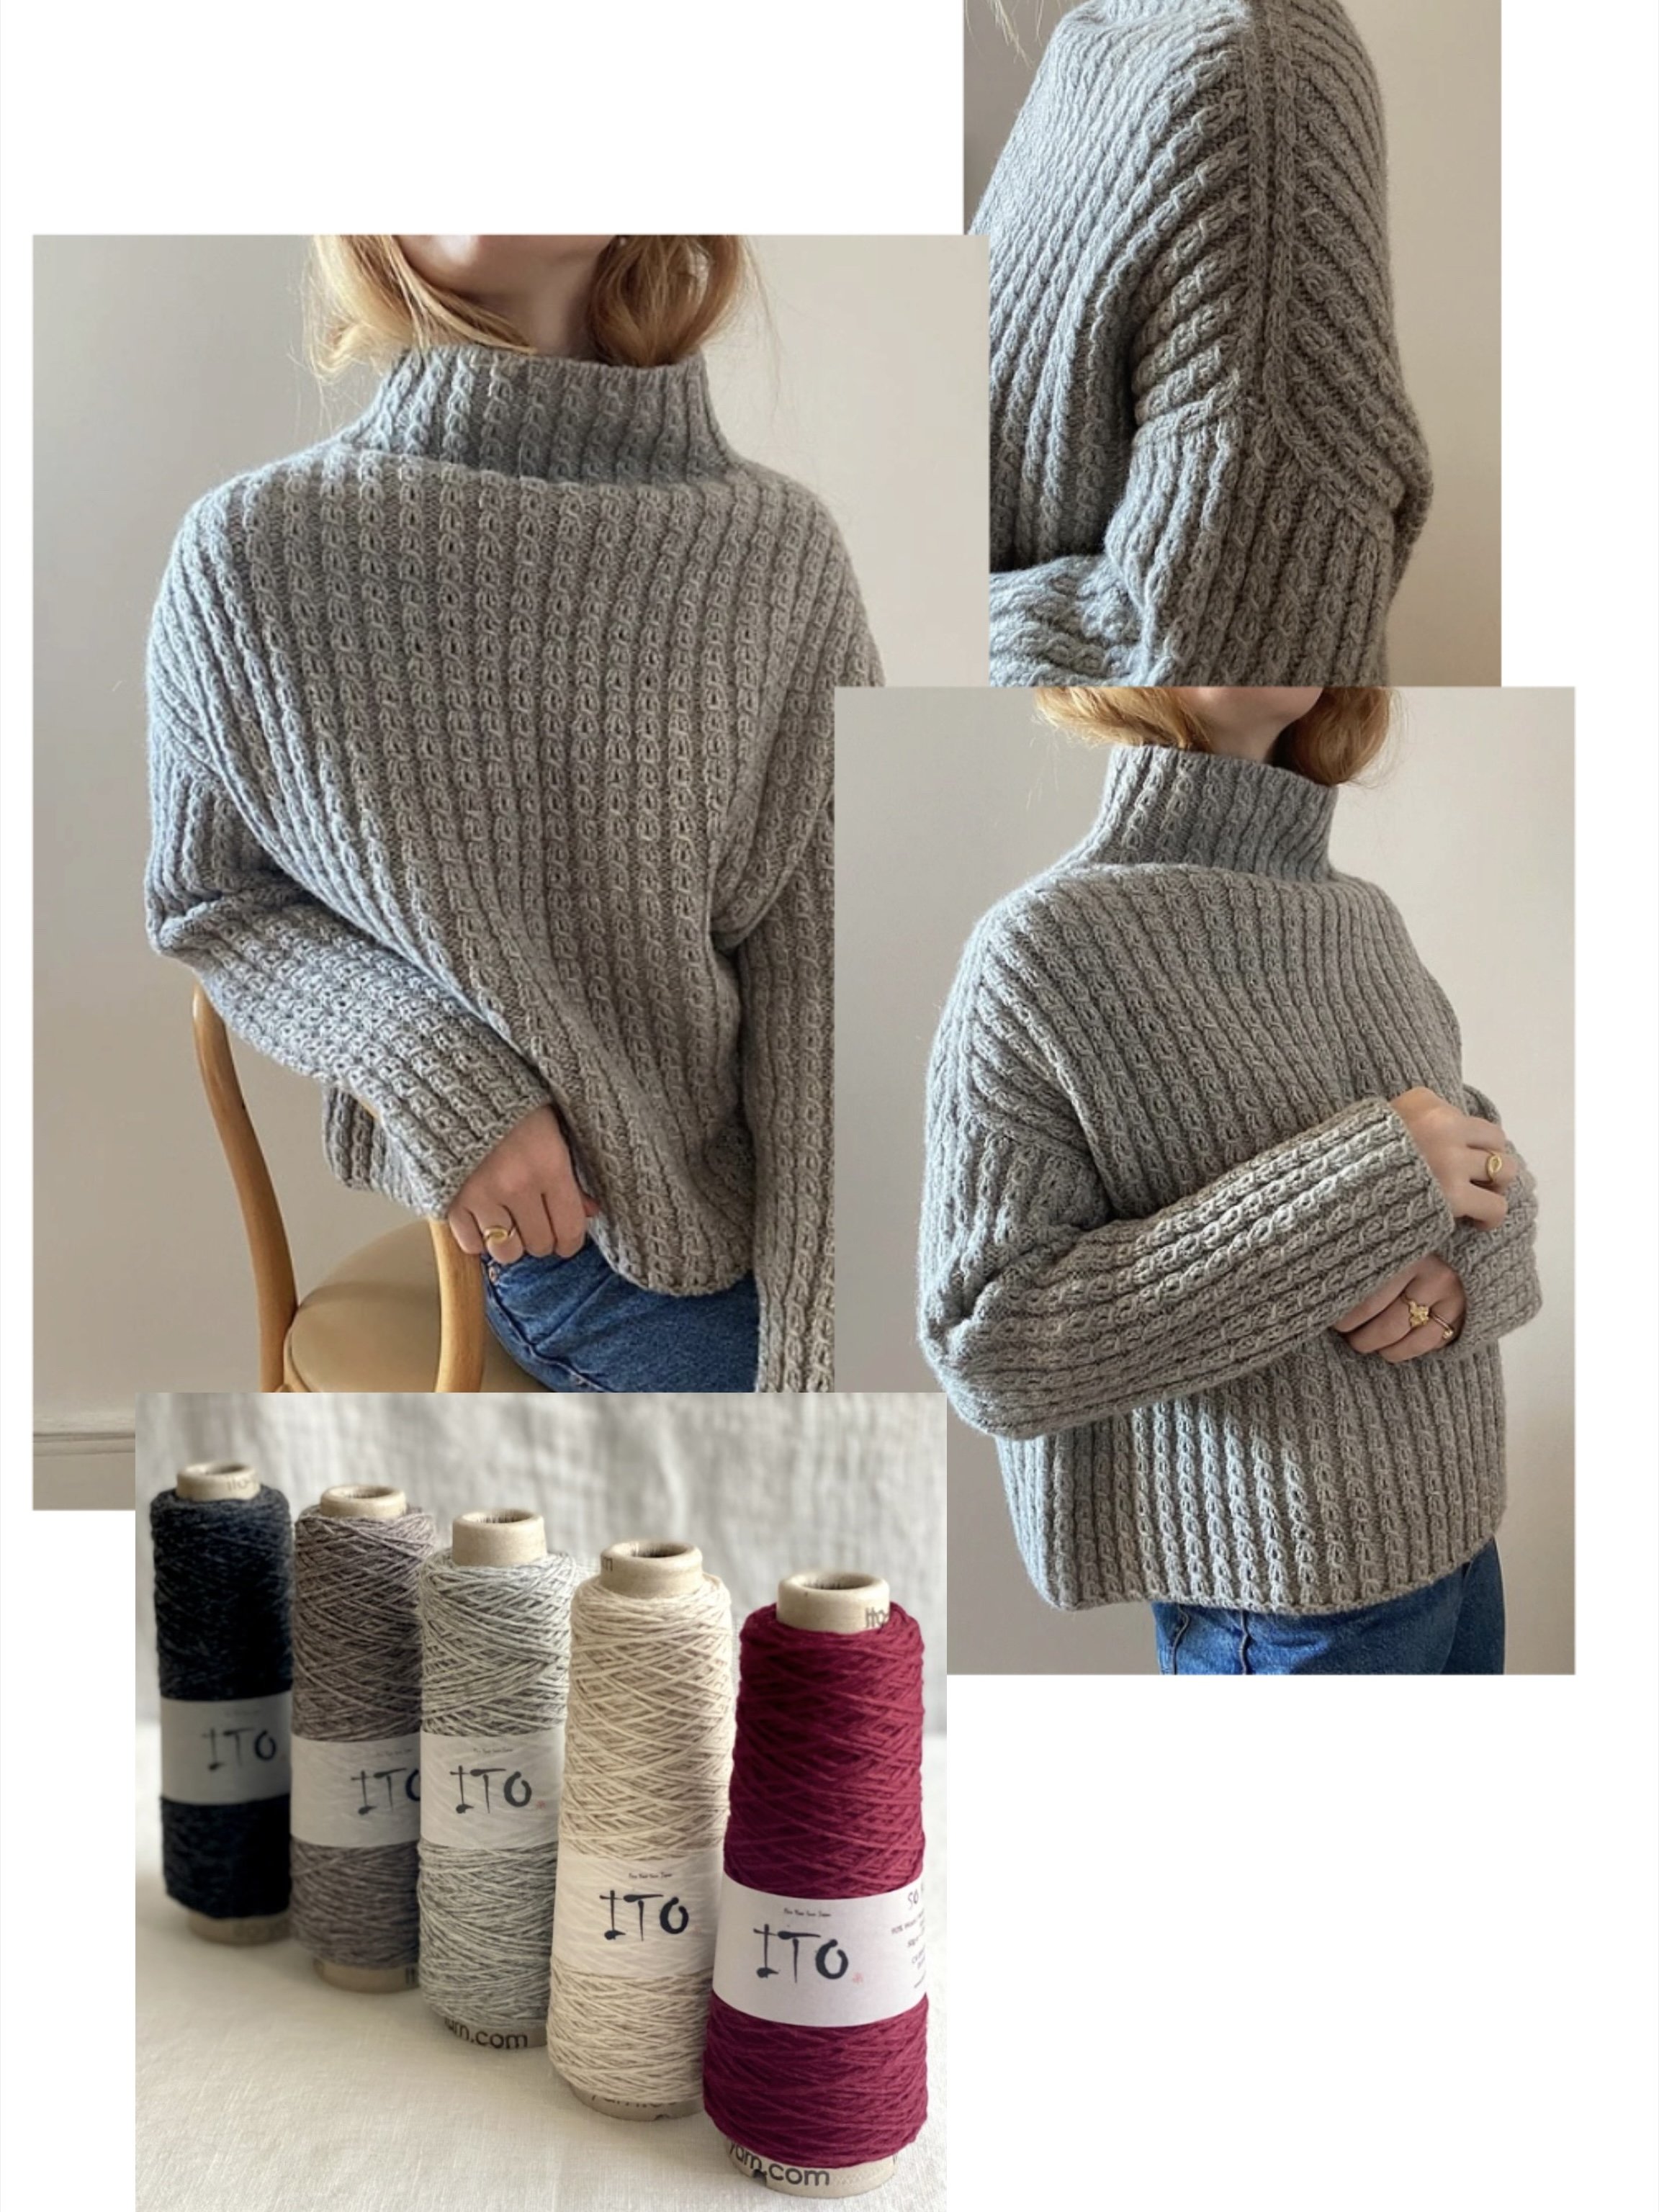 Design Board (sweaters — Judith & Lily